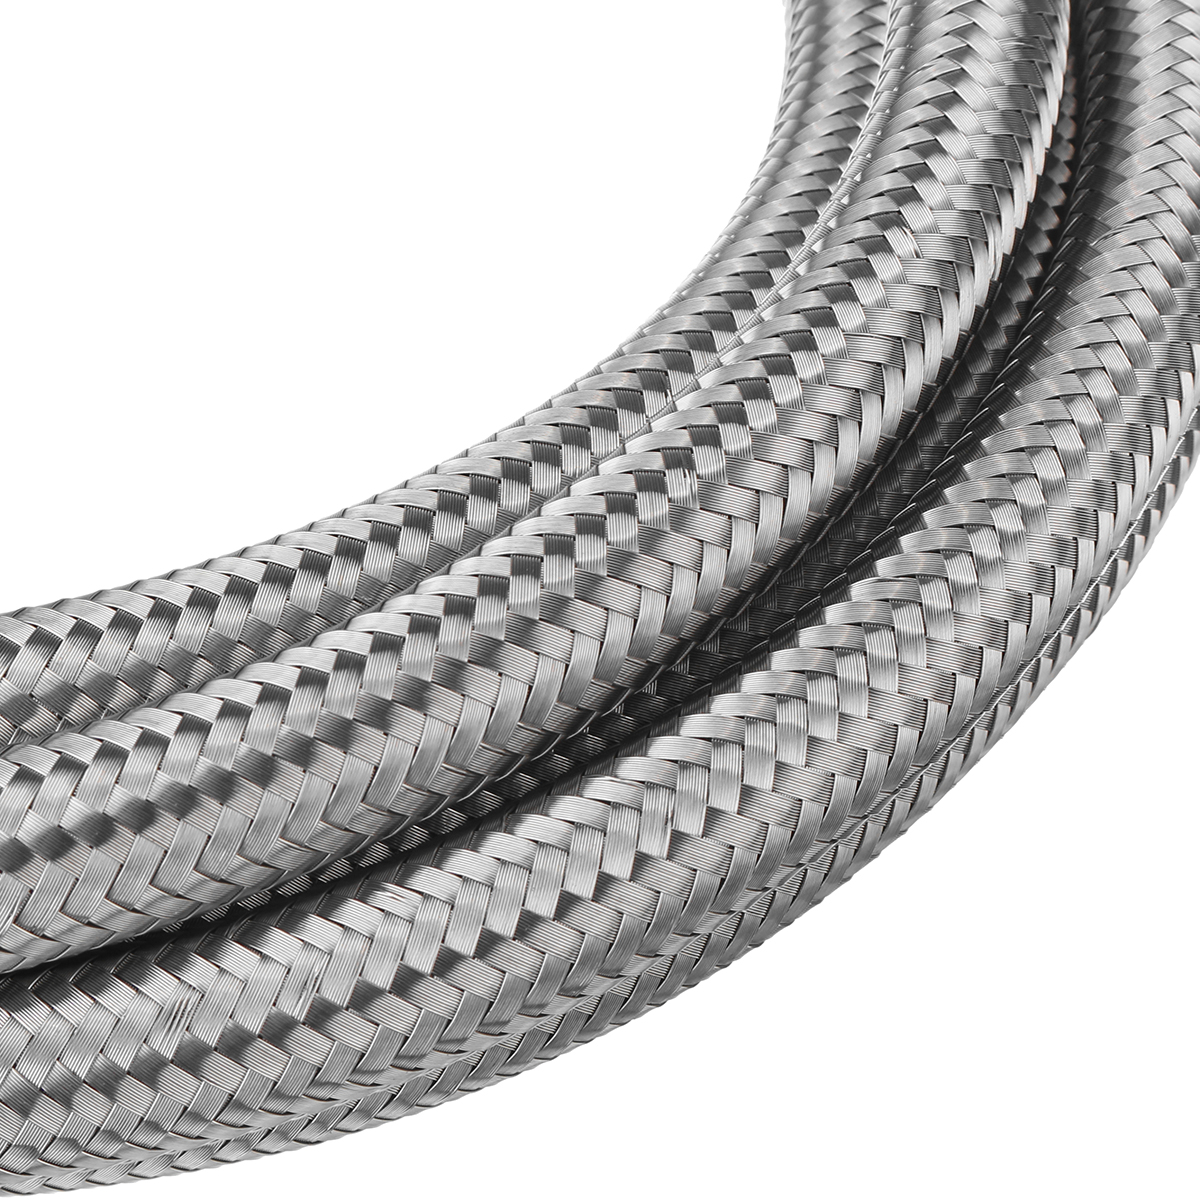 10FT-AN4-AN6-AN8-AN10-Fuel-Hose-Oil-Gas-Line-Pipe-Stainless-Steel-Braided-Silver-1685142-7